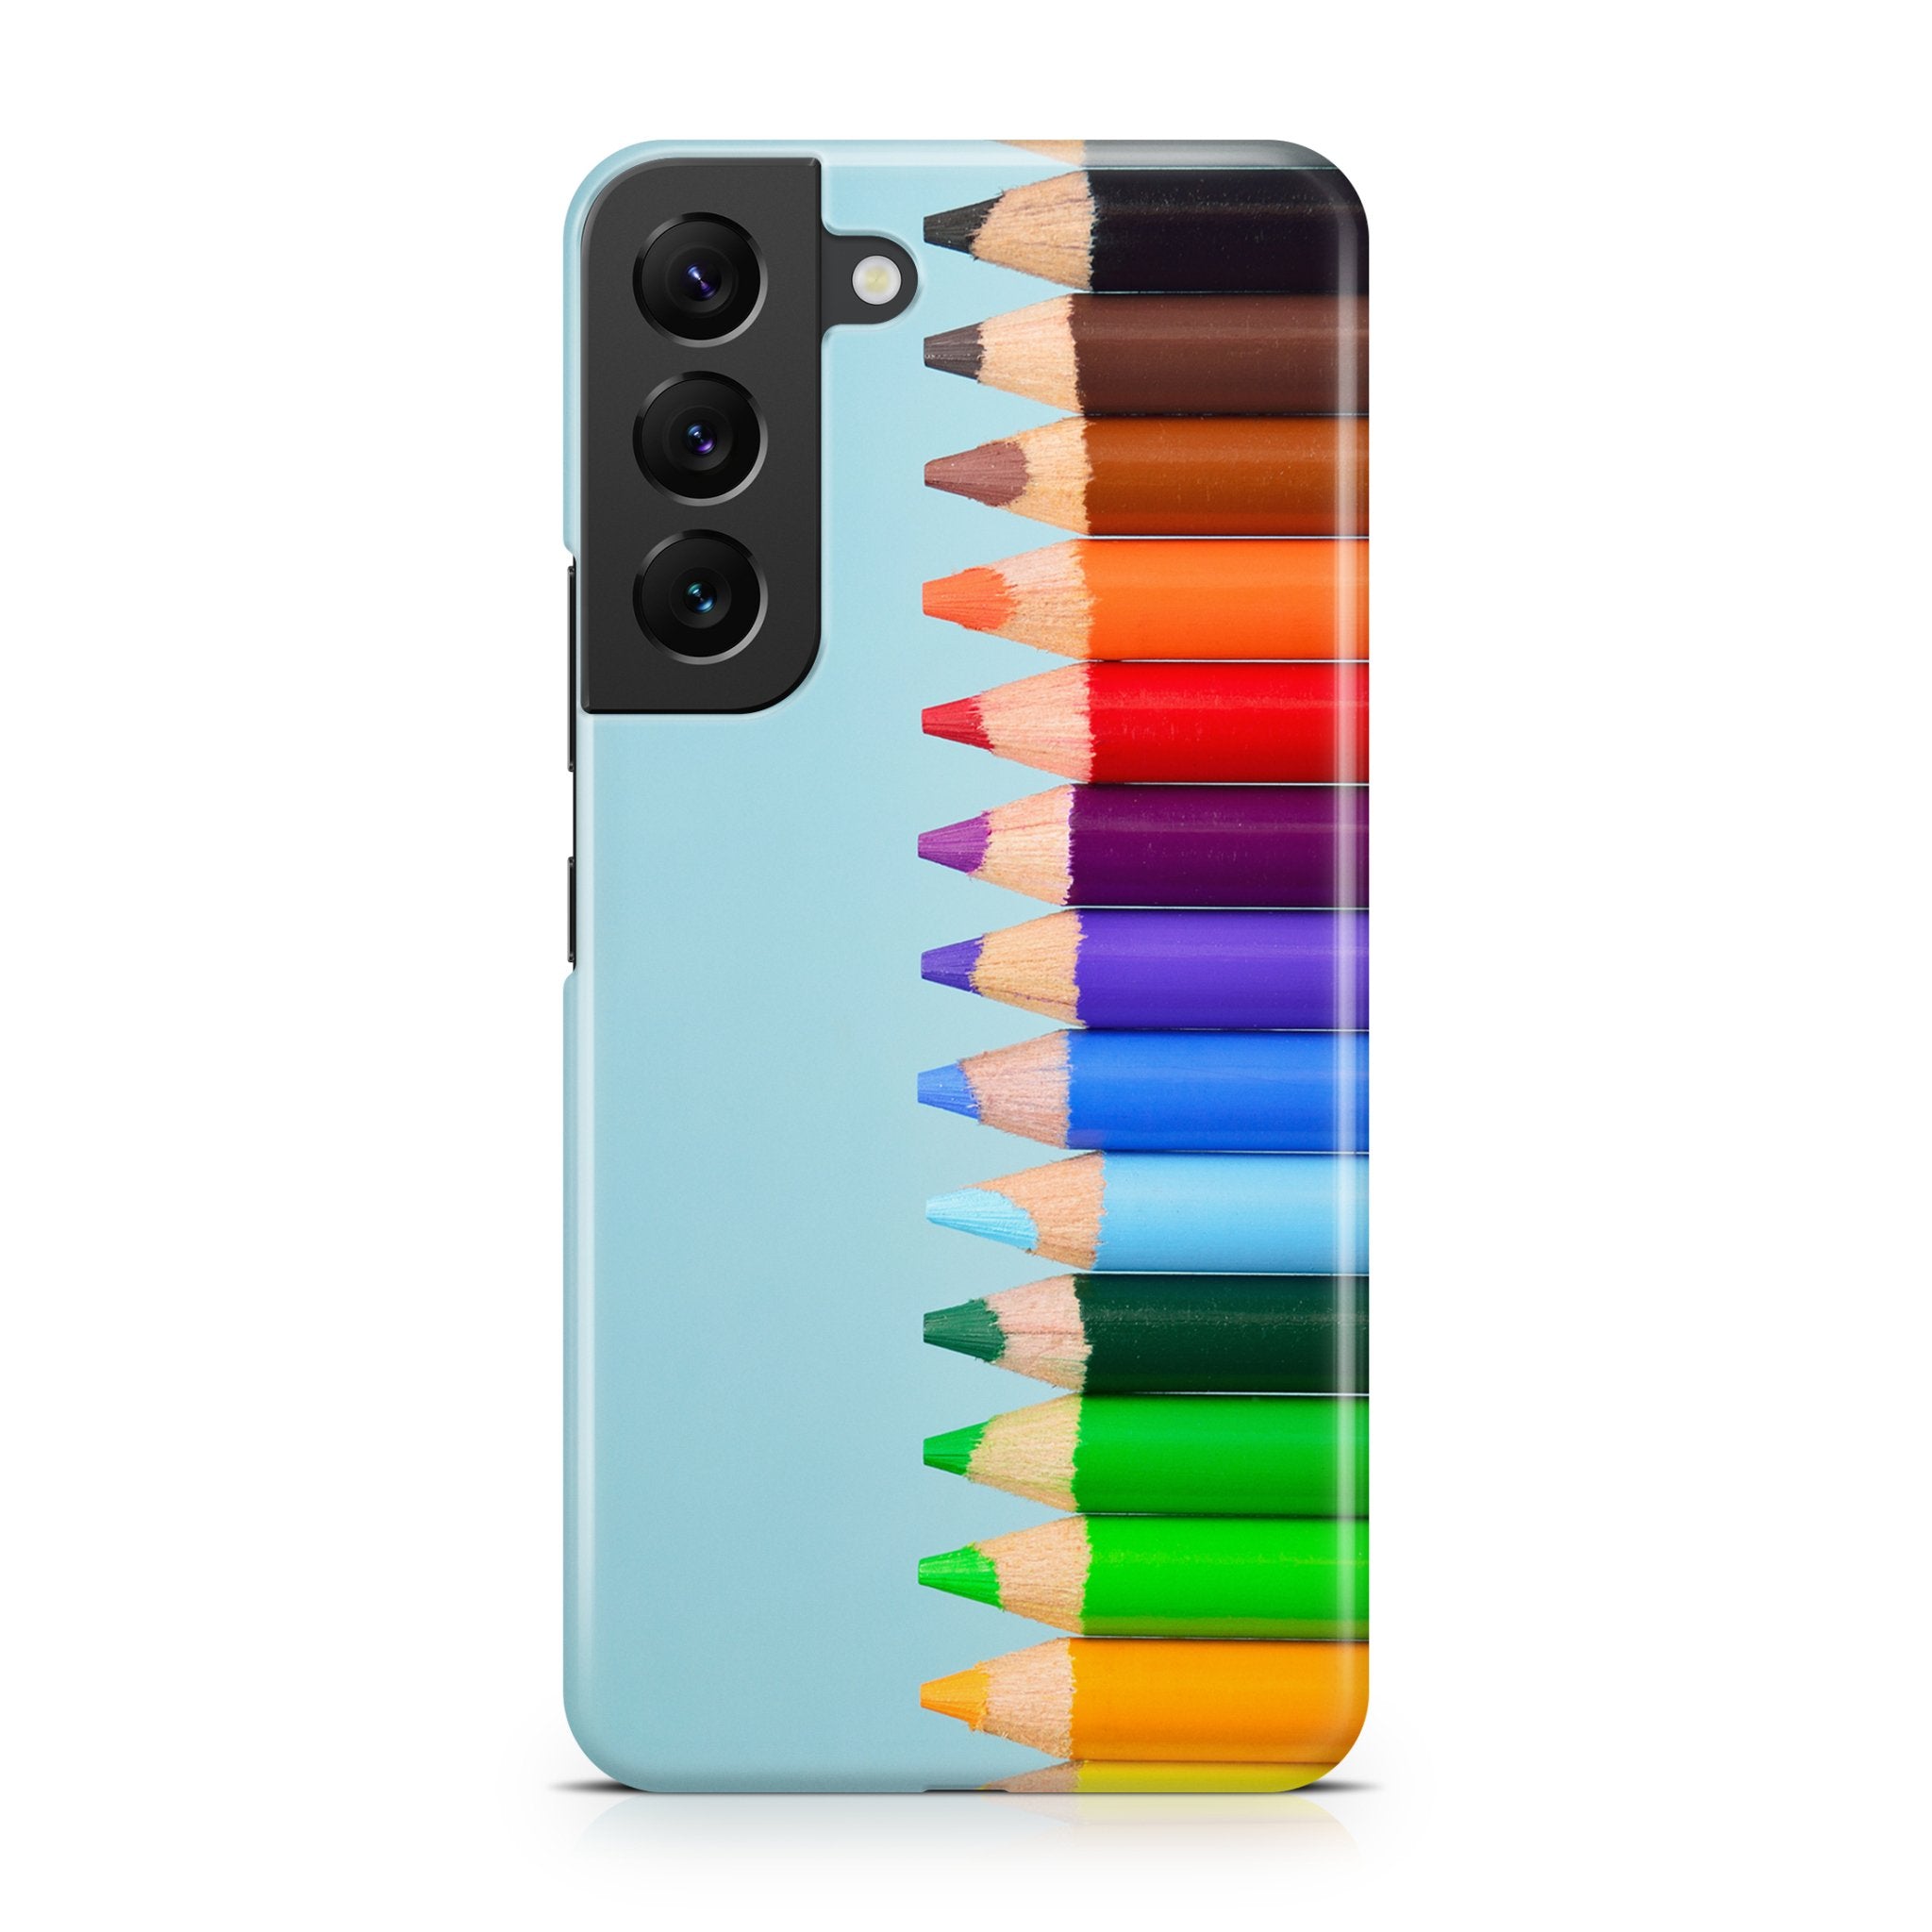 Colored Pencils - Samsung phone case designs by CaseSwagger